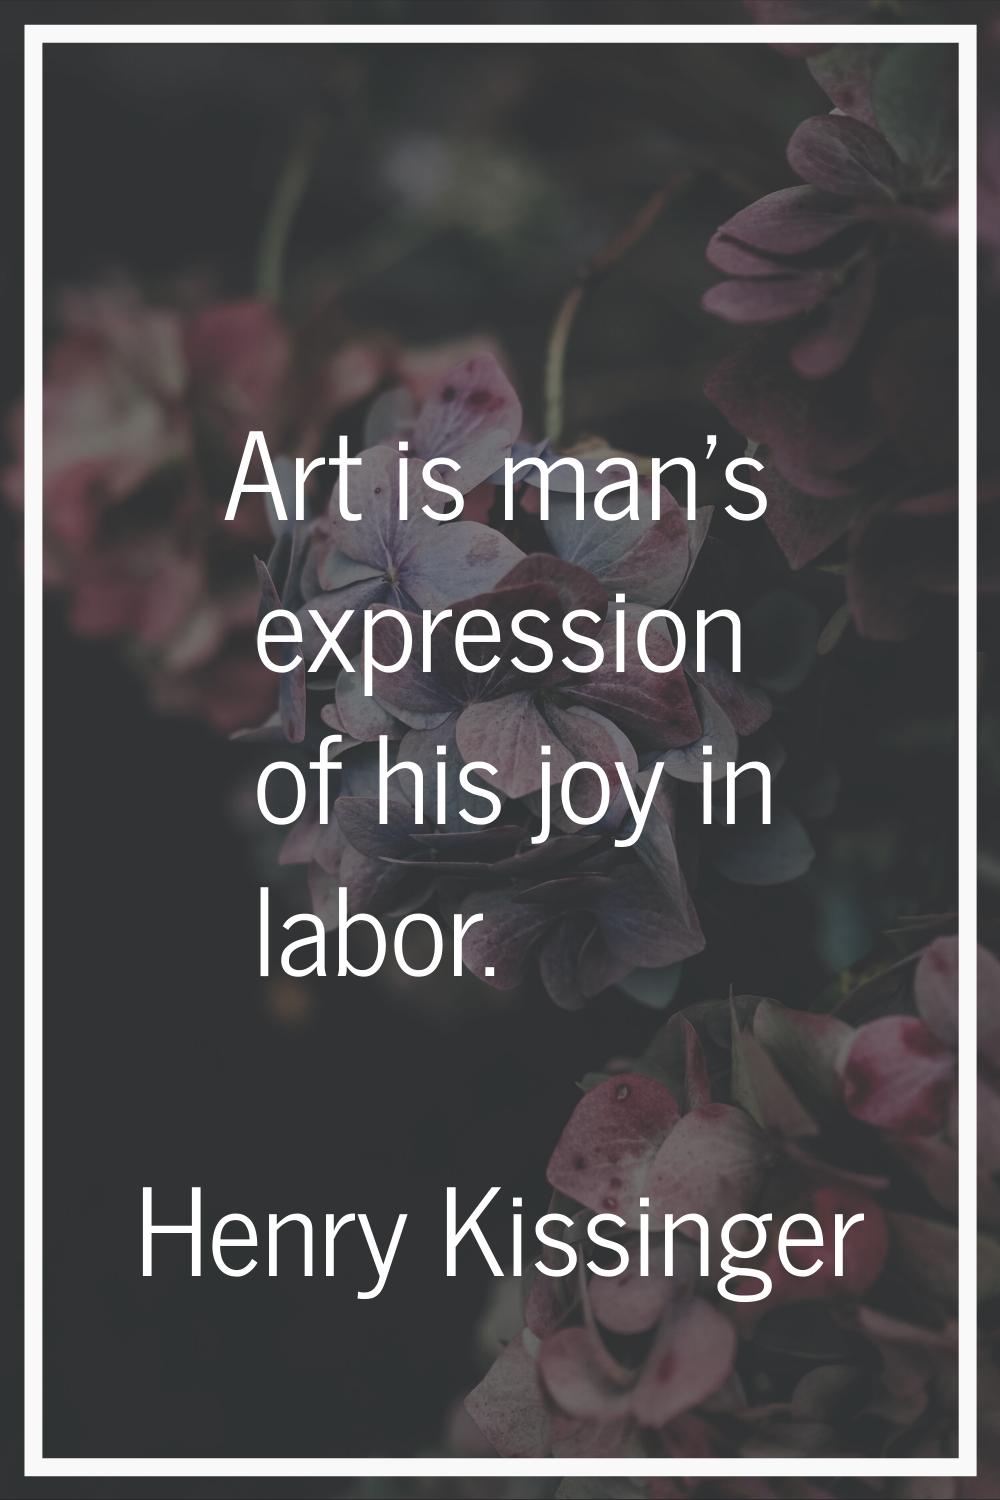 Art is man's expression of his joy in labor.